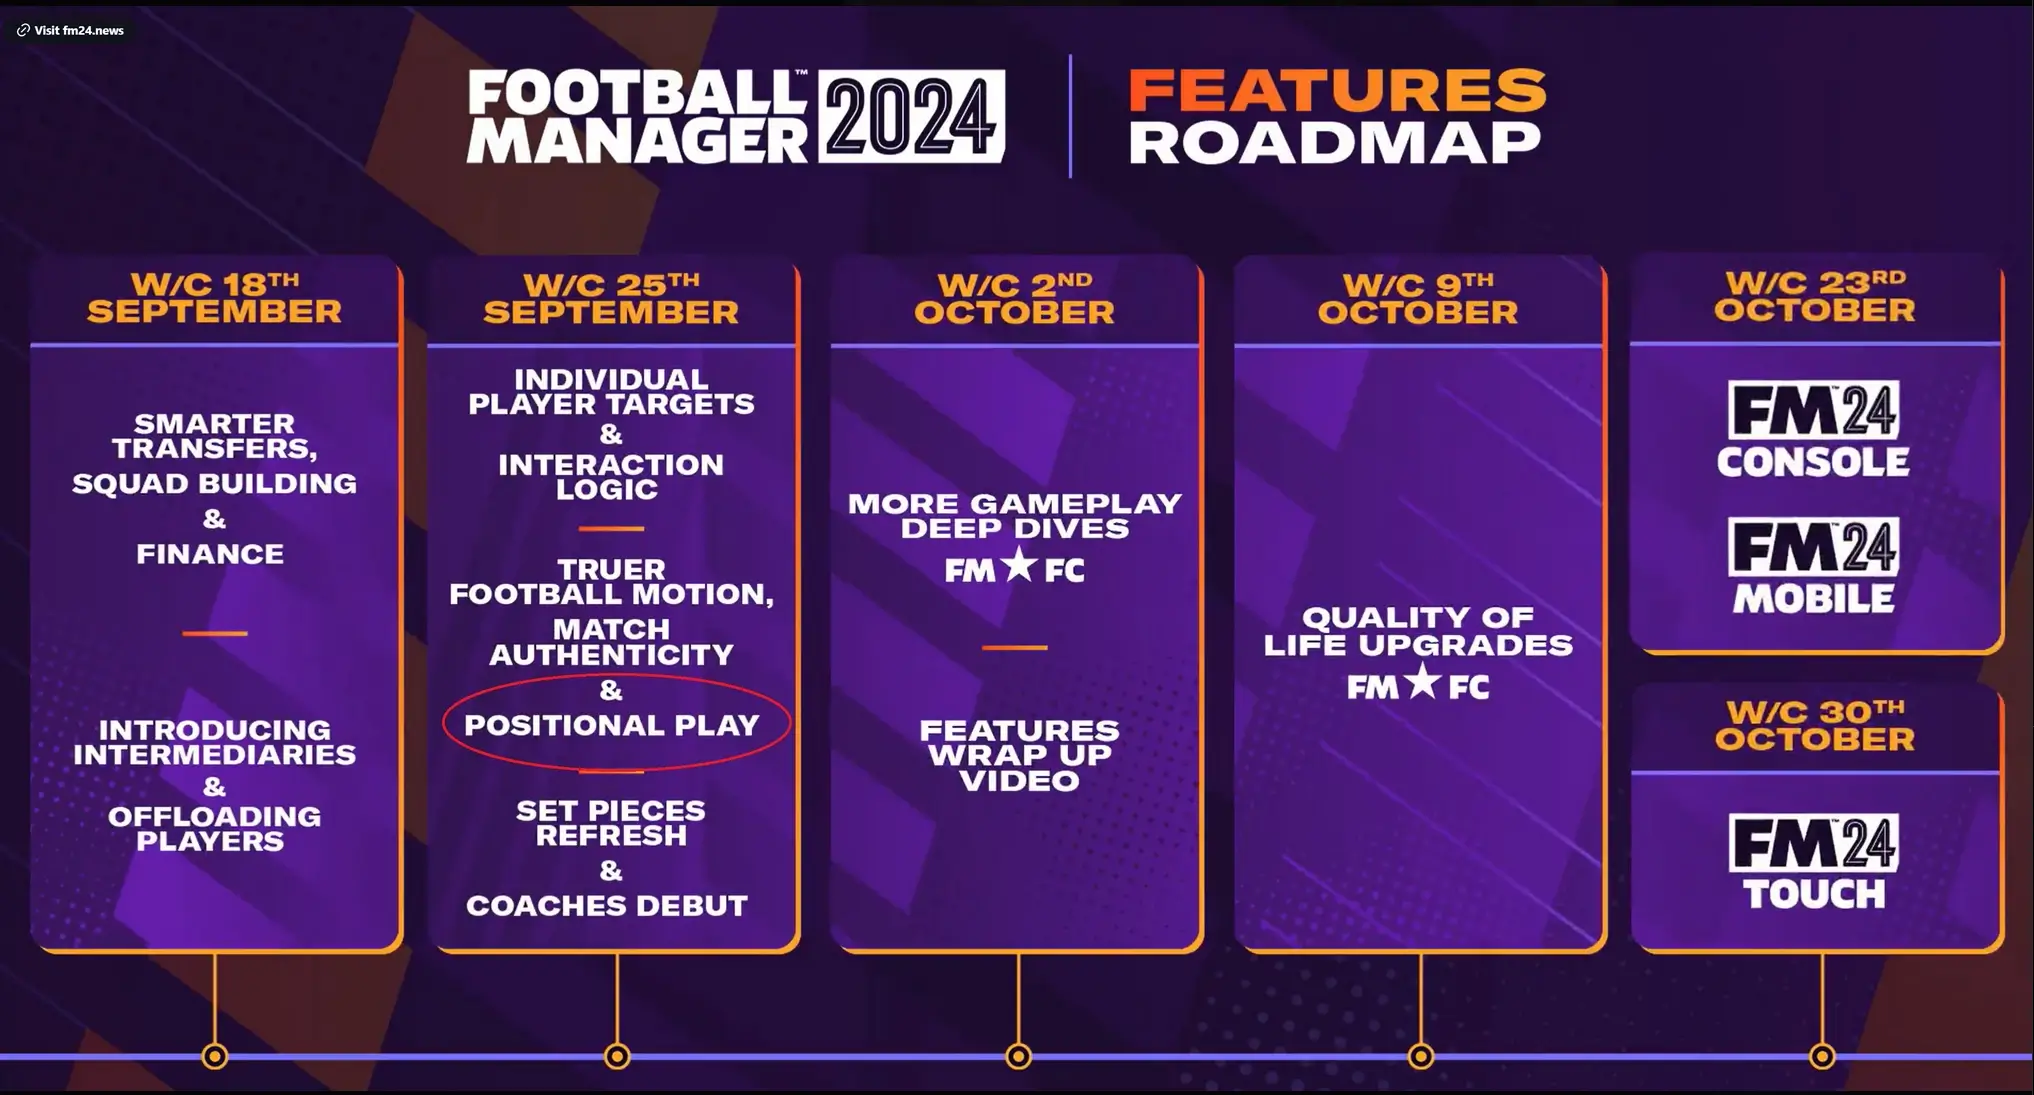 Football Manager 2024 Mobile Tips and Tricks for the Beginners